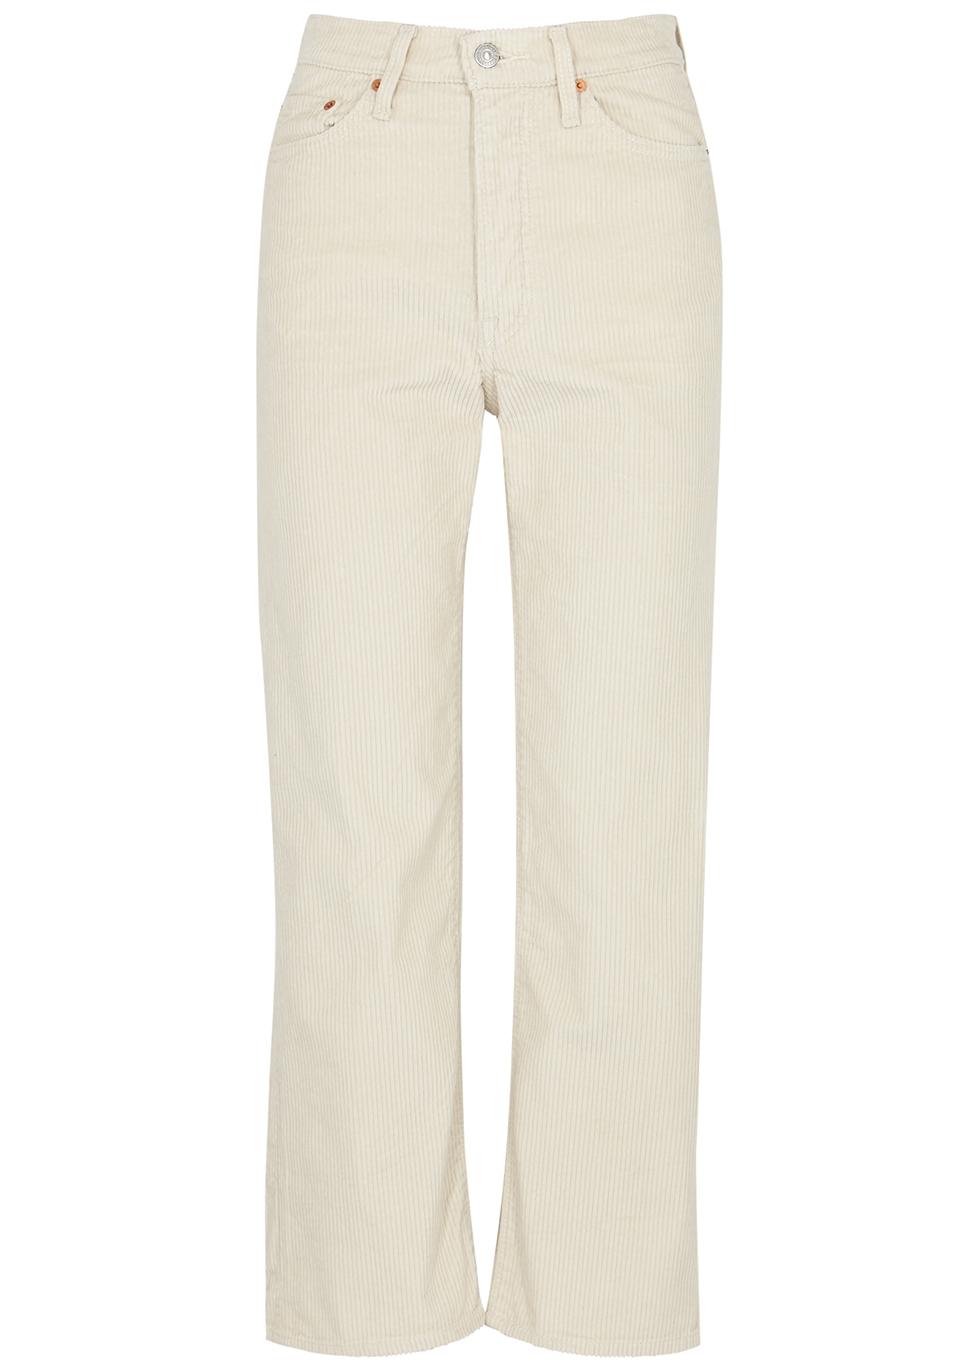 Levi's Ribcage Cream Corduroy Straight-leg Jeans in Natural | Lyst